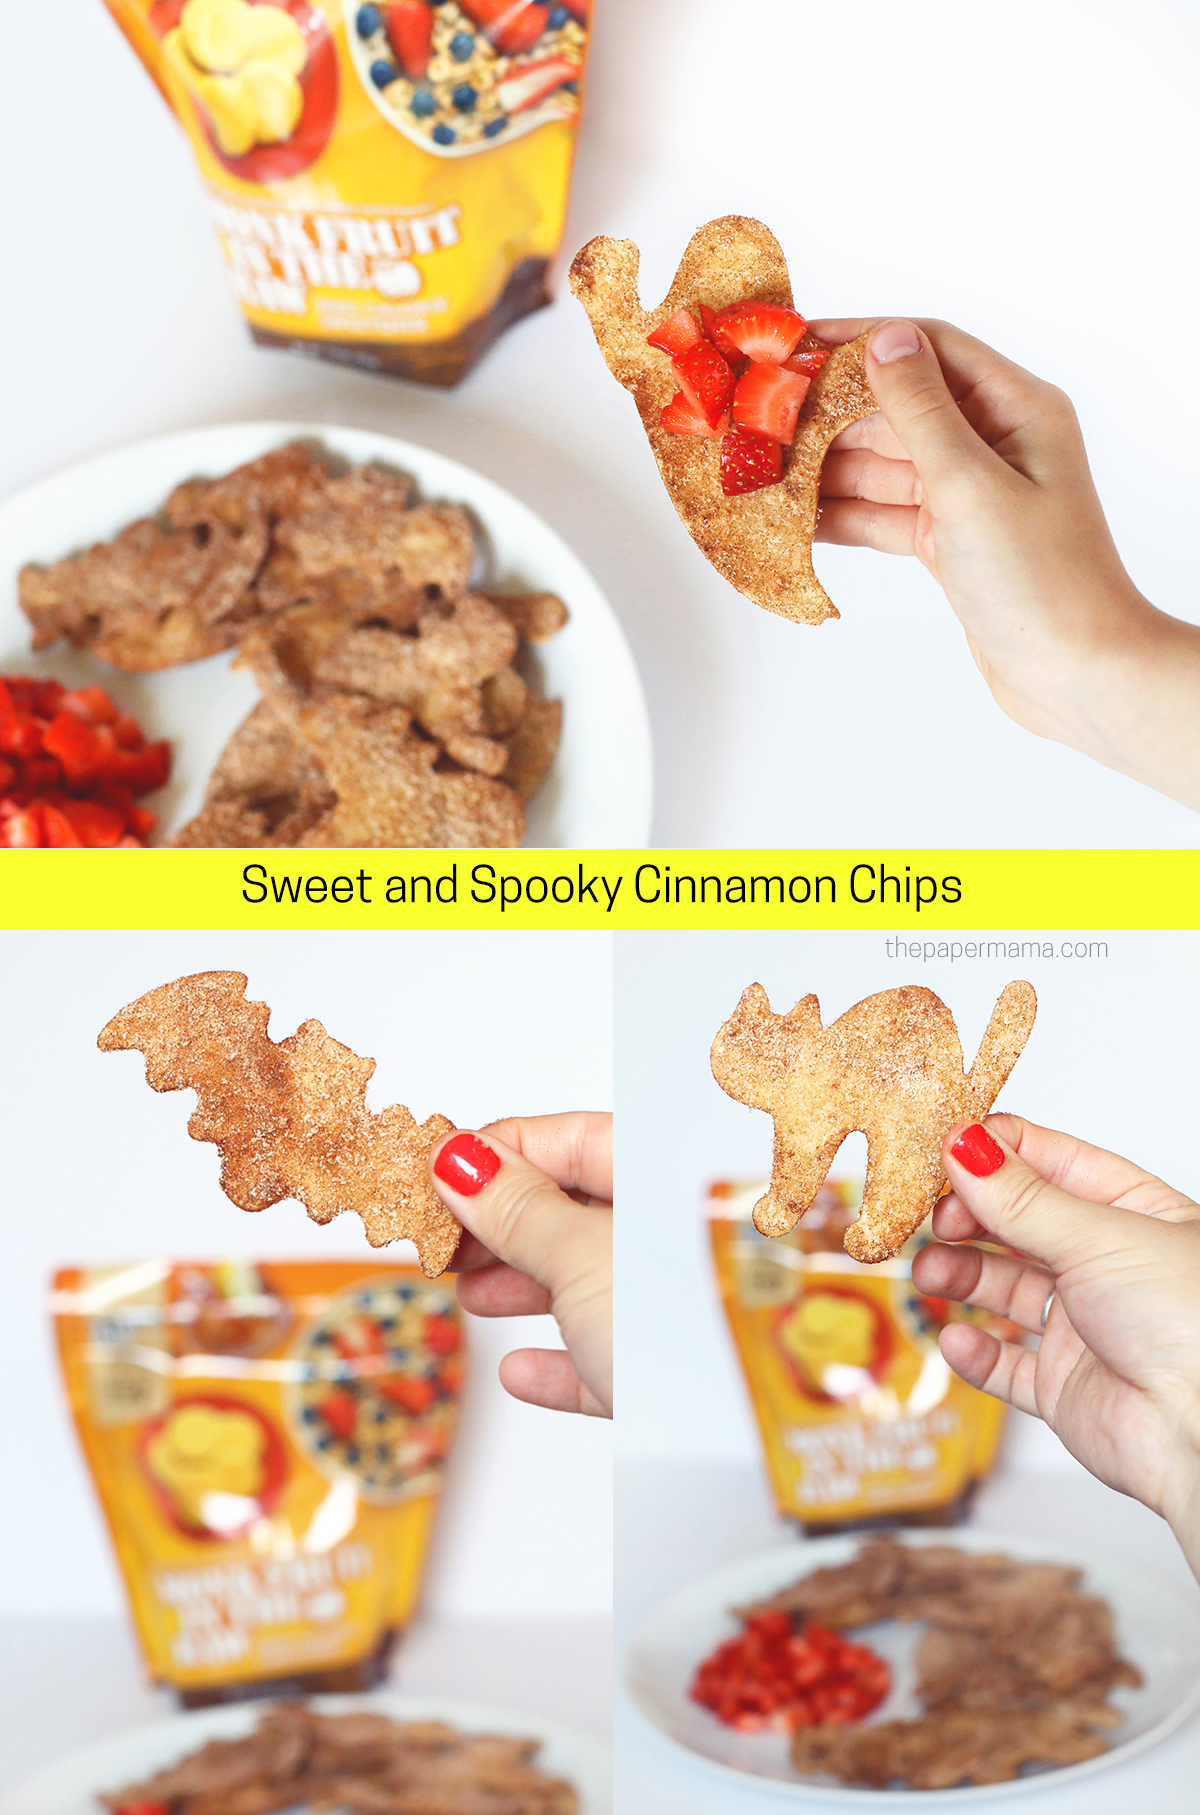 Sweet and Spooky Cinnamon Chips for Halloween